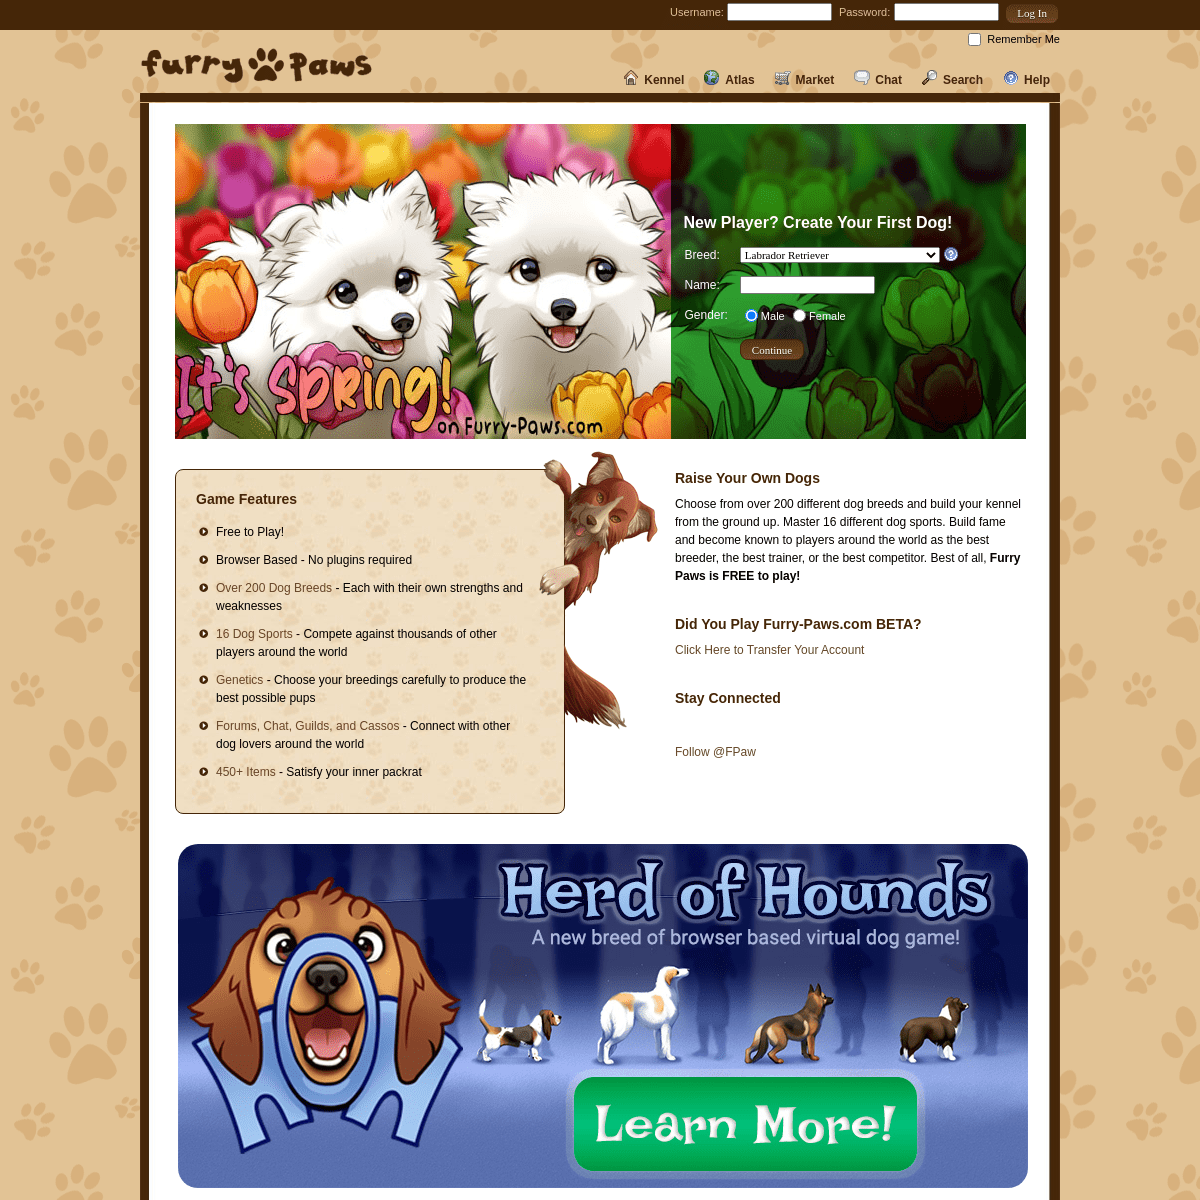 A complete backup of https://furry-paws.com